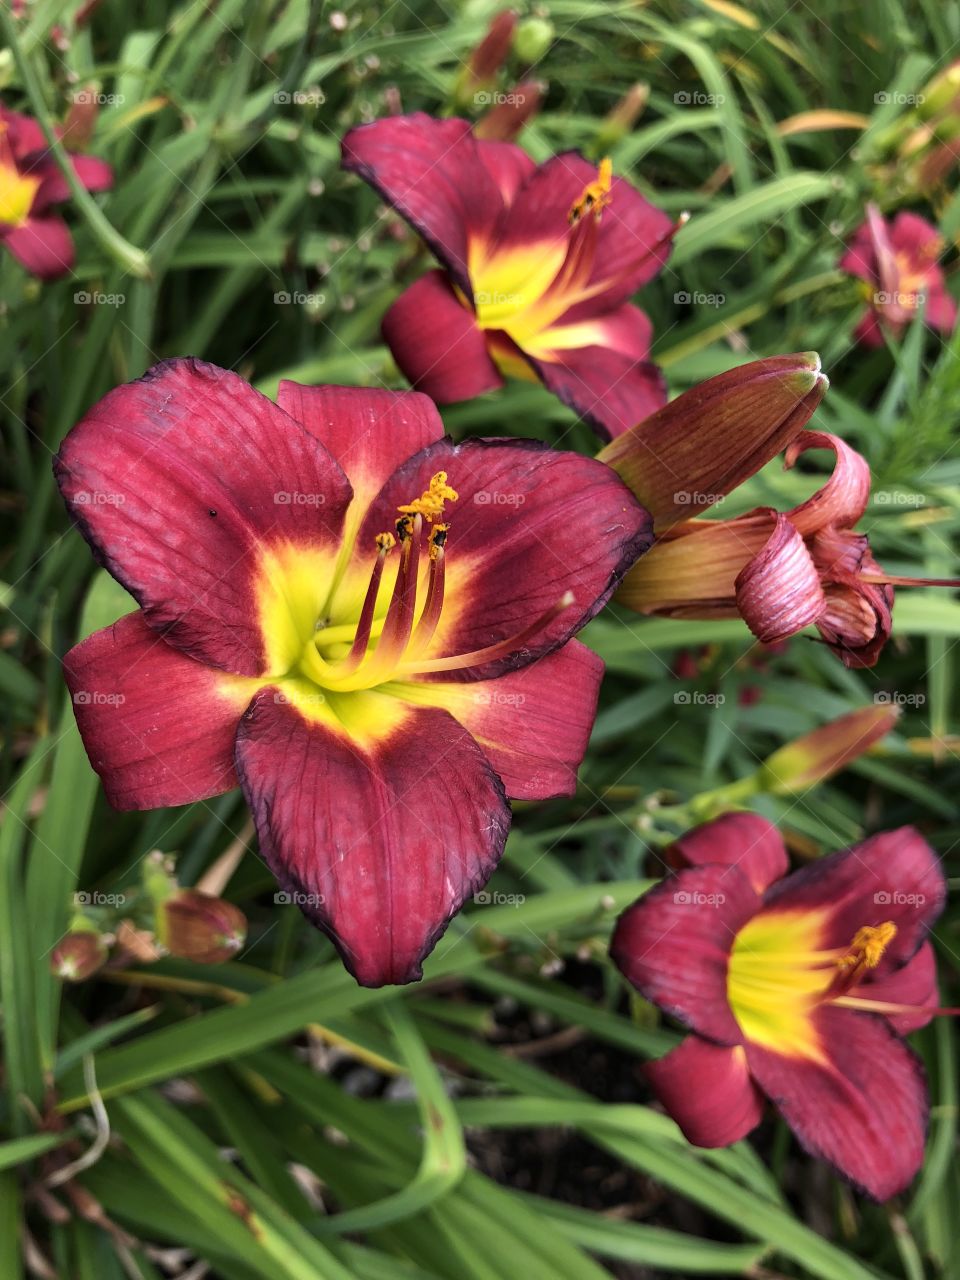 Summer flower with burnt red and greenish/yellow accents. Photo can be used for digital or print. Photos taken with iPhone 8.